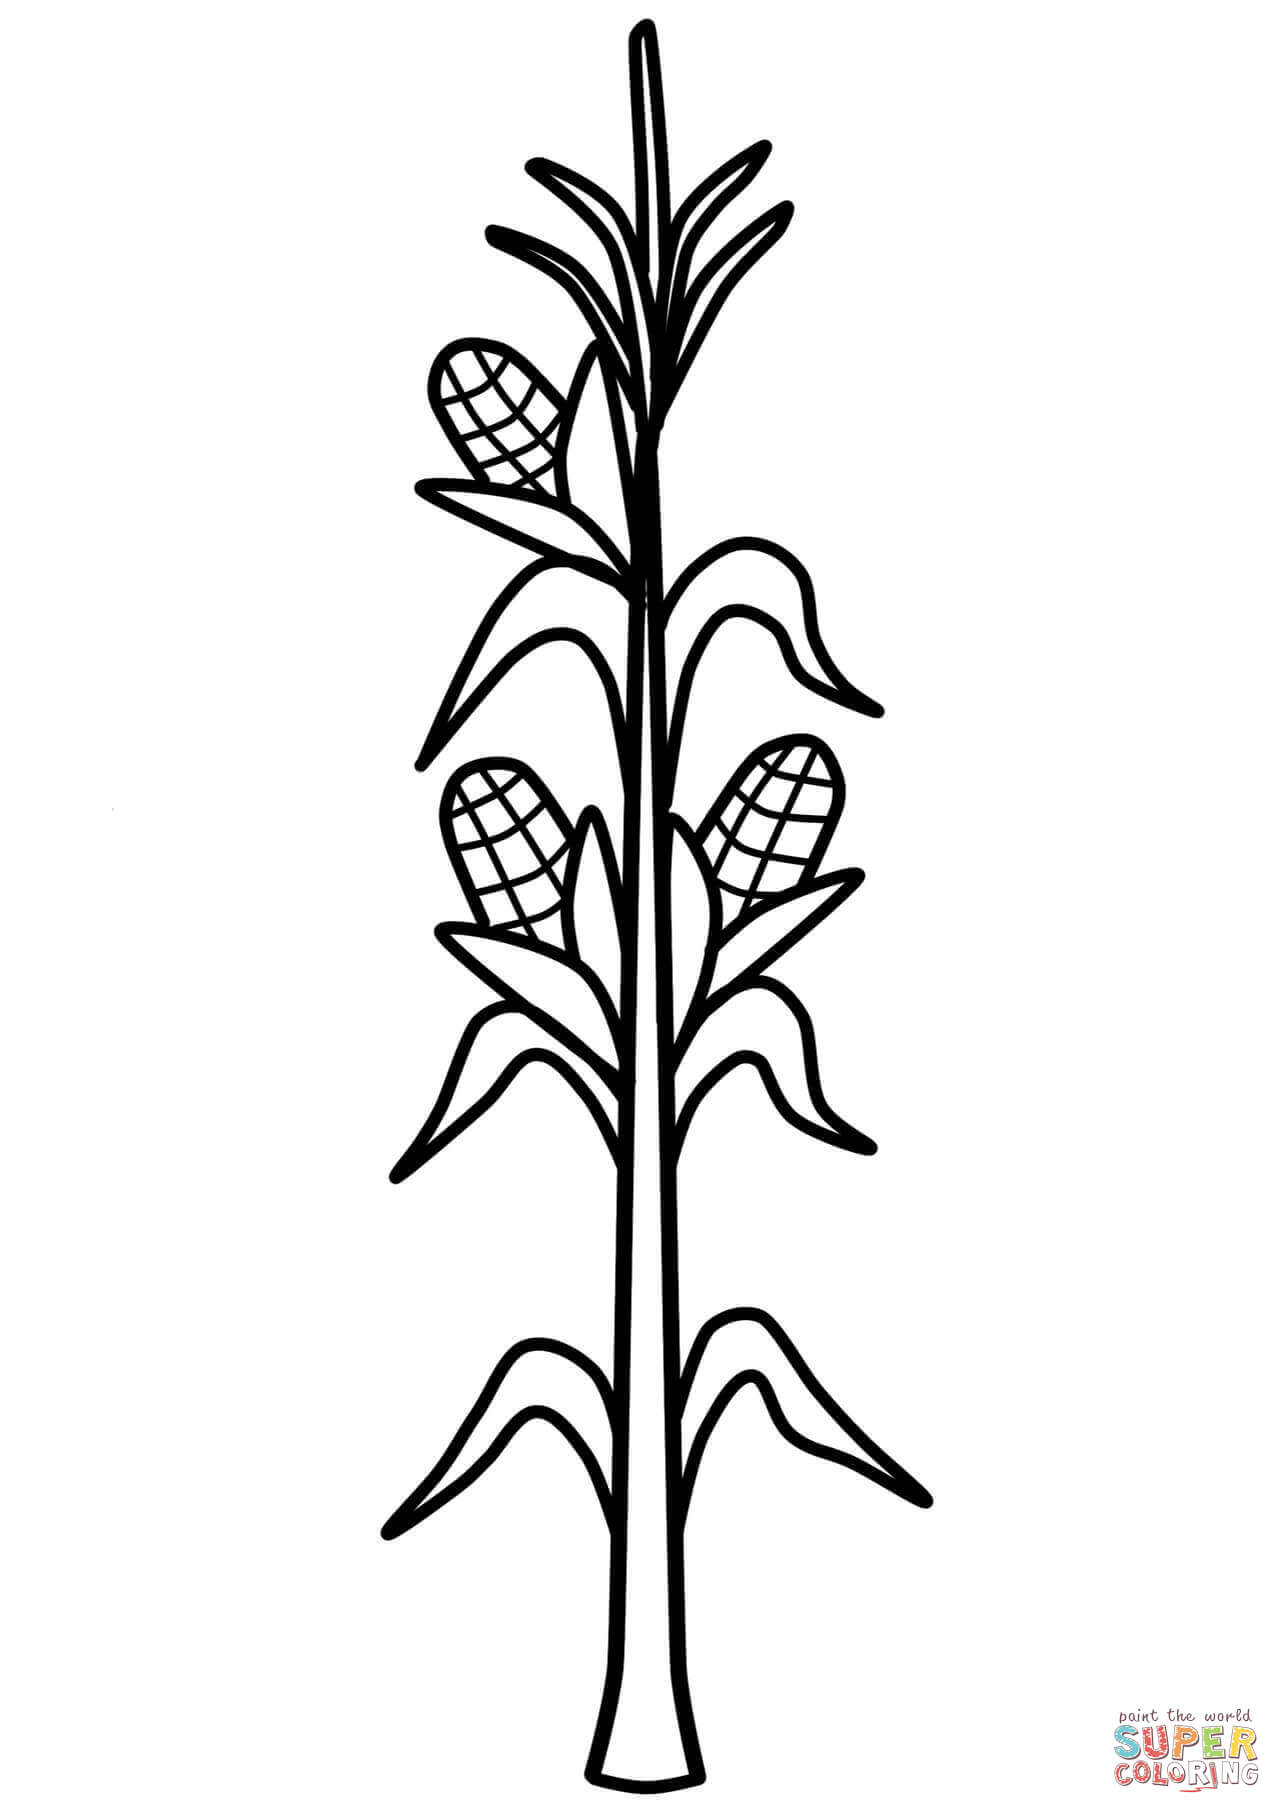 Corn stalk coloring page free printable coloring pages